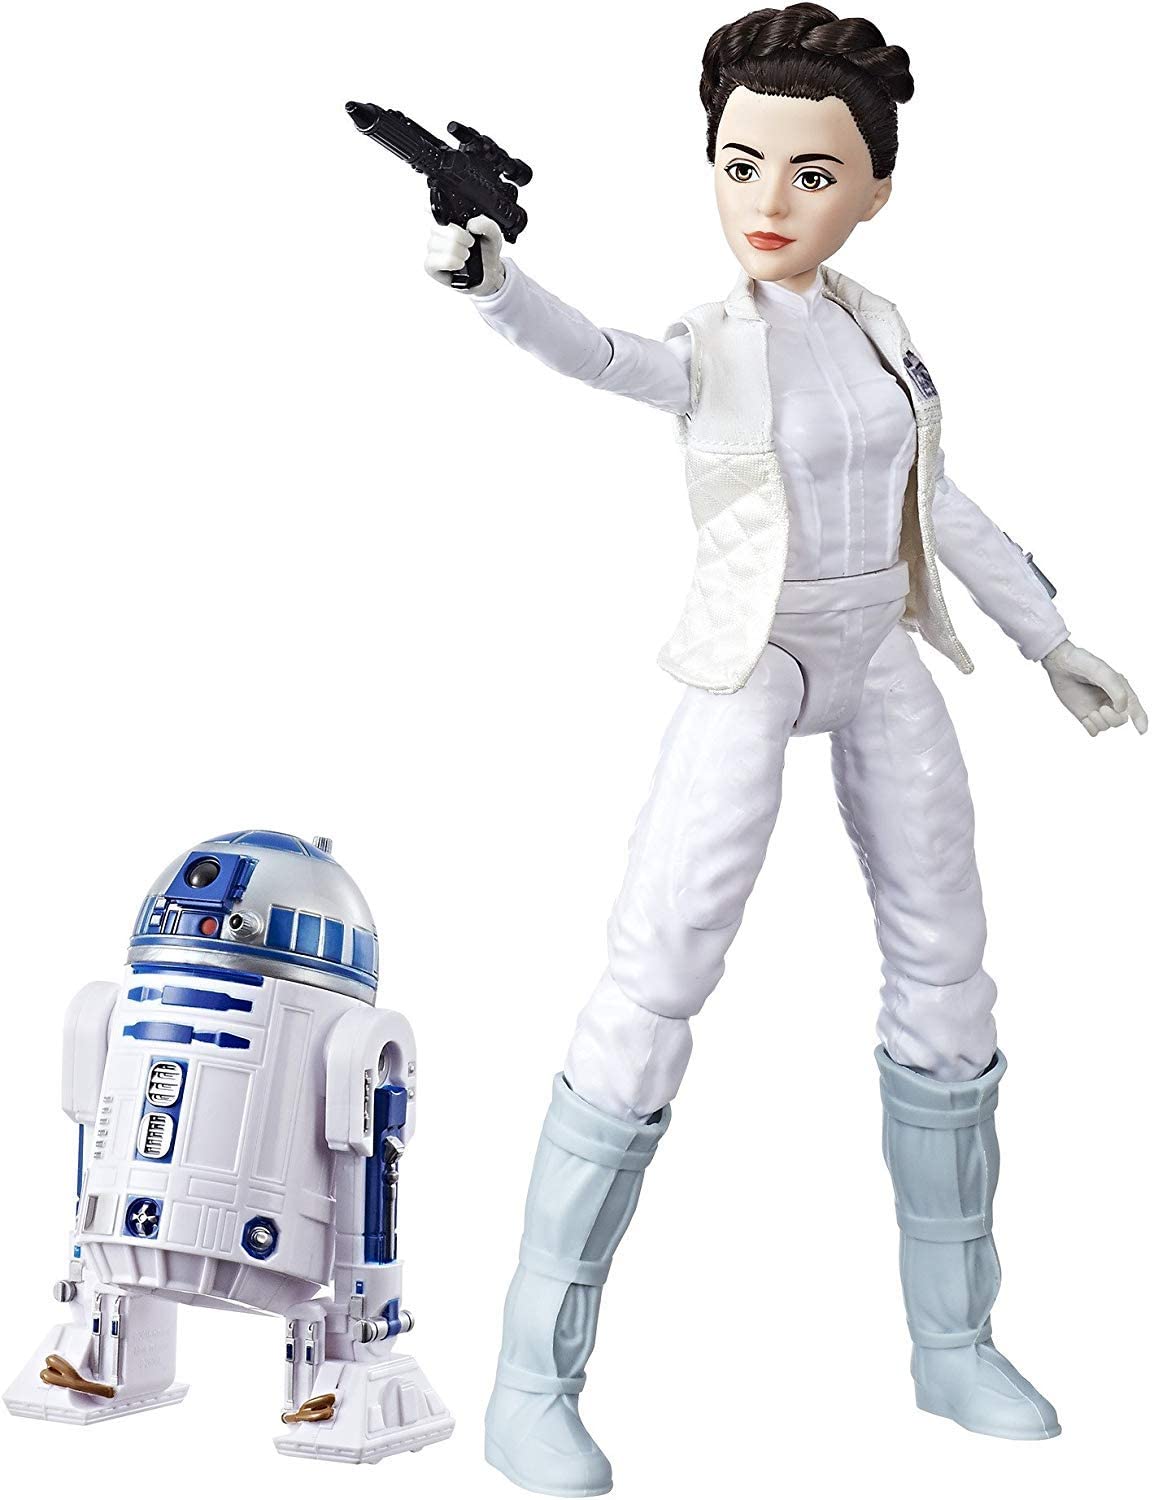 Star Wars Forces Of Destiny Princess Leia Organa 12 Inch Action Figure With R2-D2 Astromech Droid - Brand New Factory Sealed